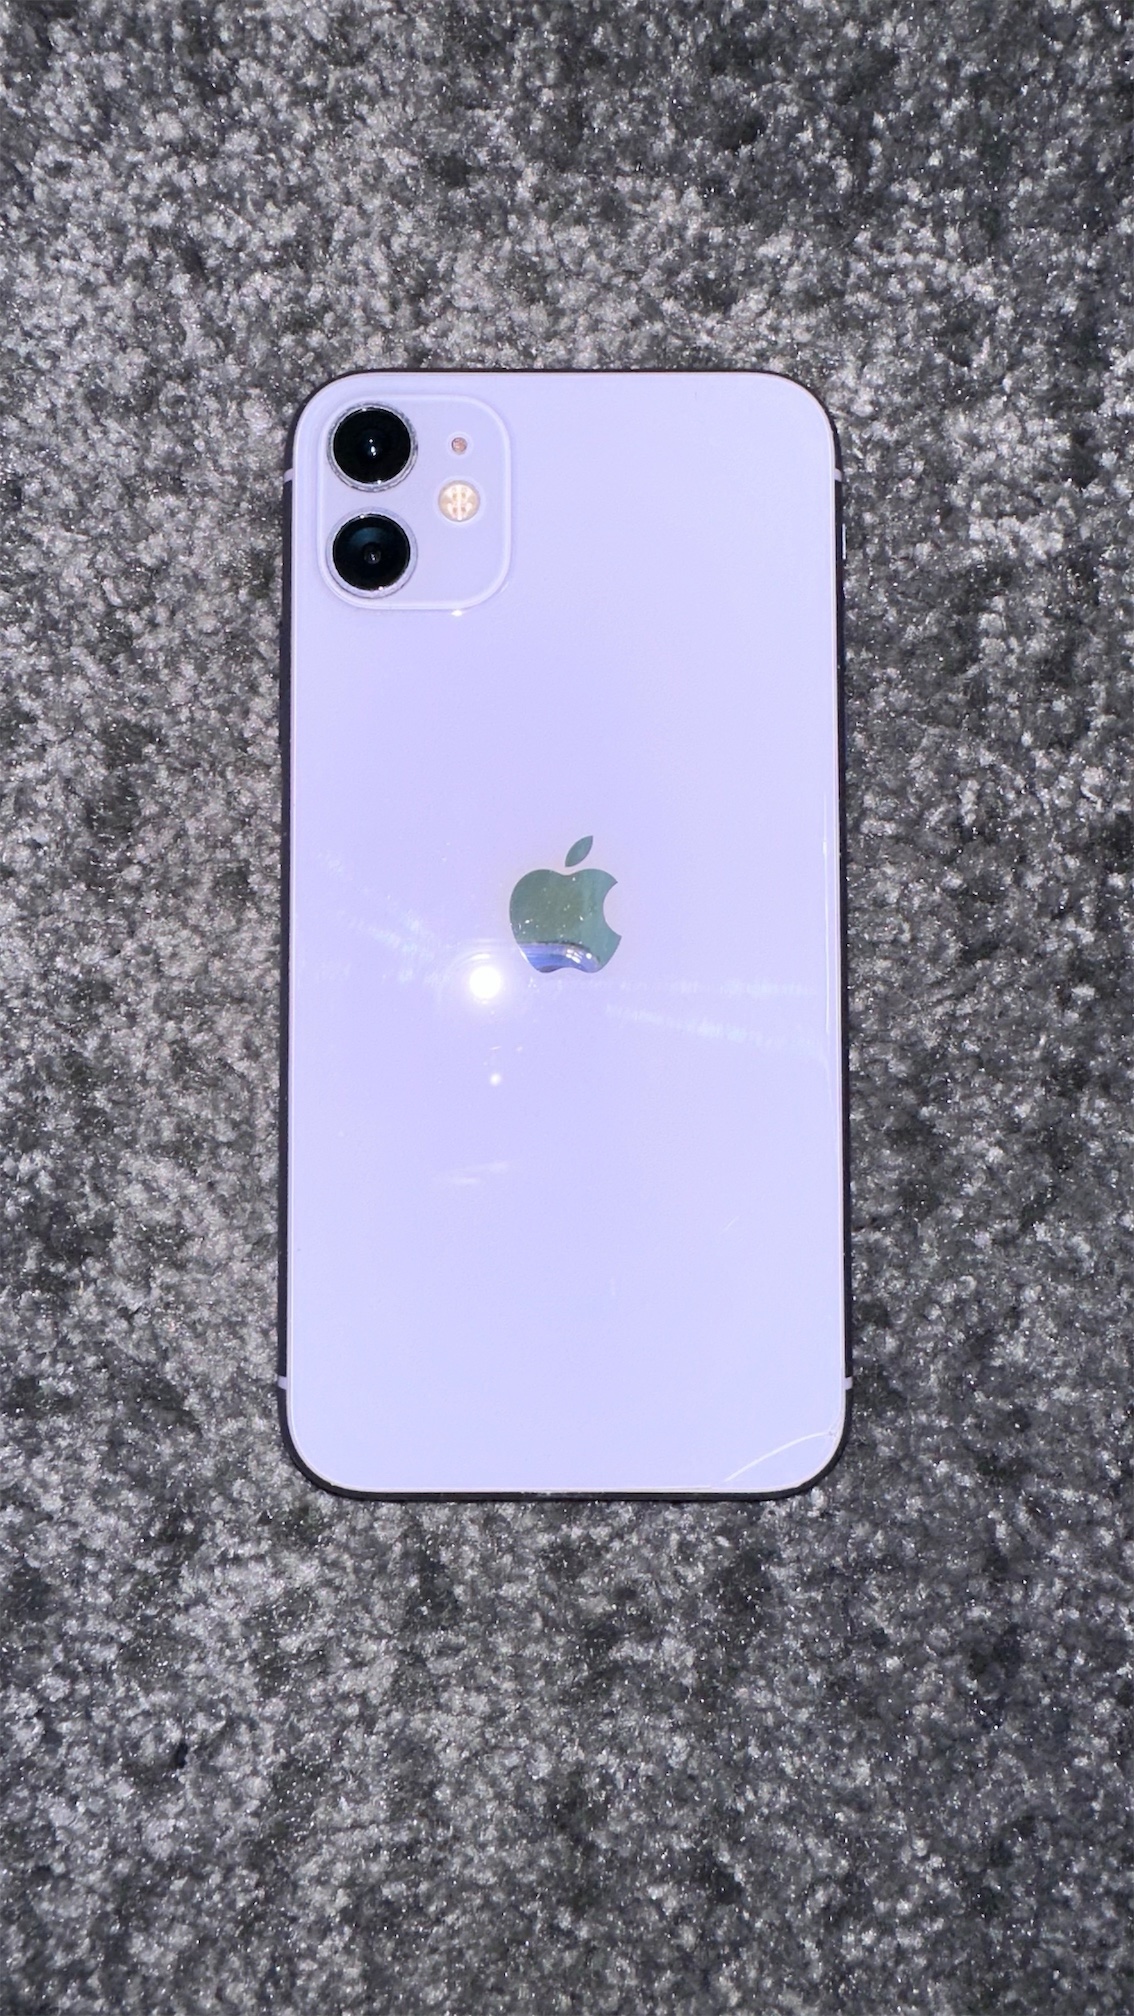 iPHONE 11 normal 64Gb Factory